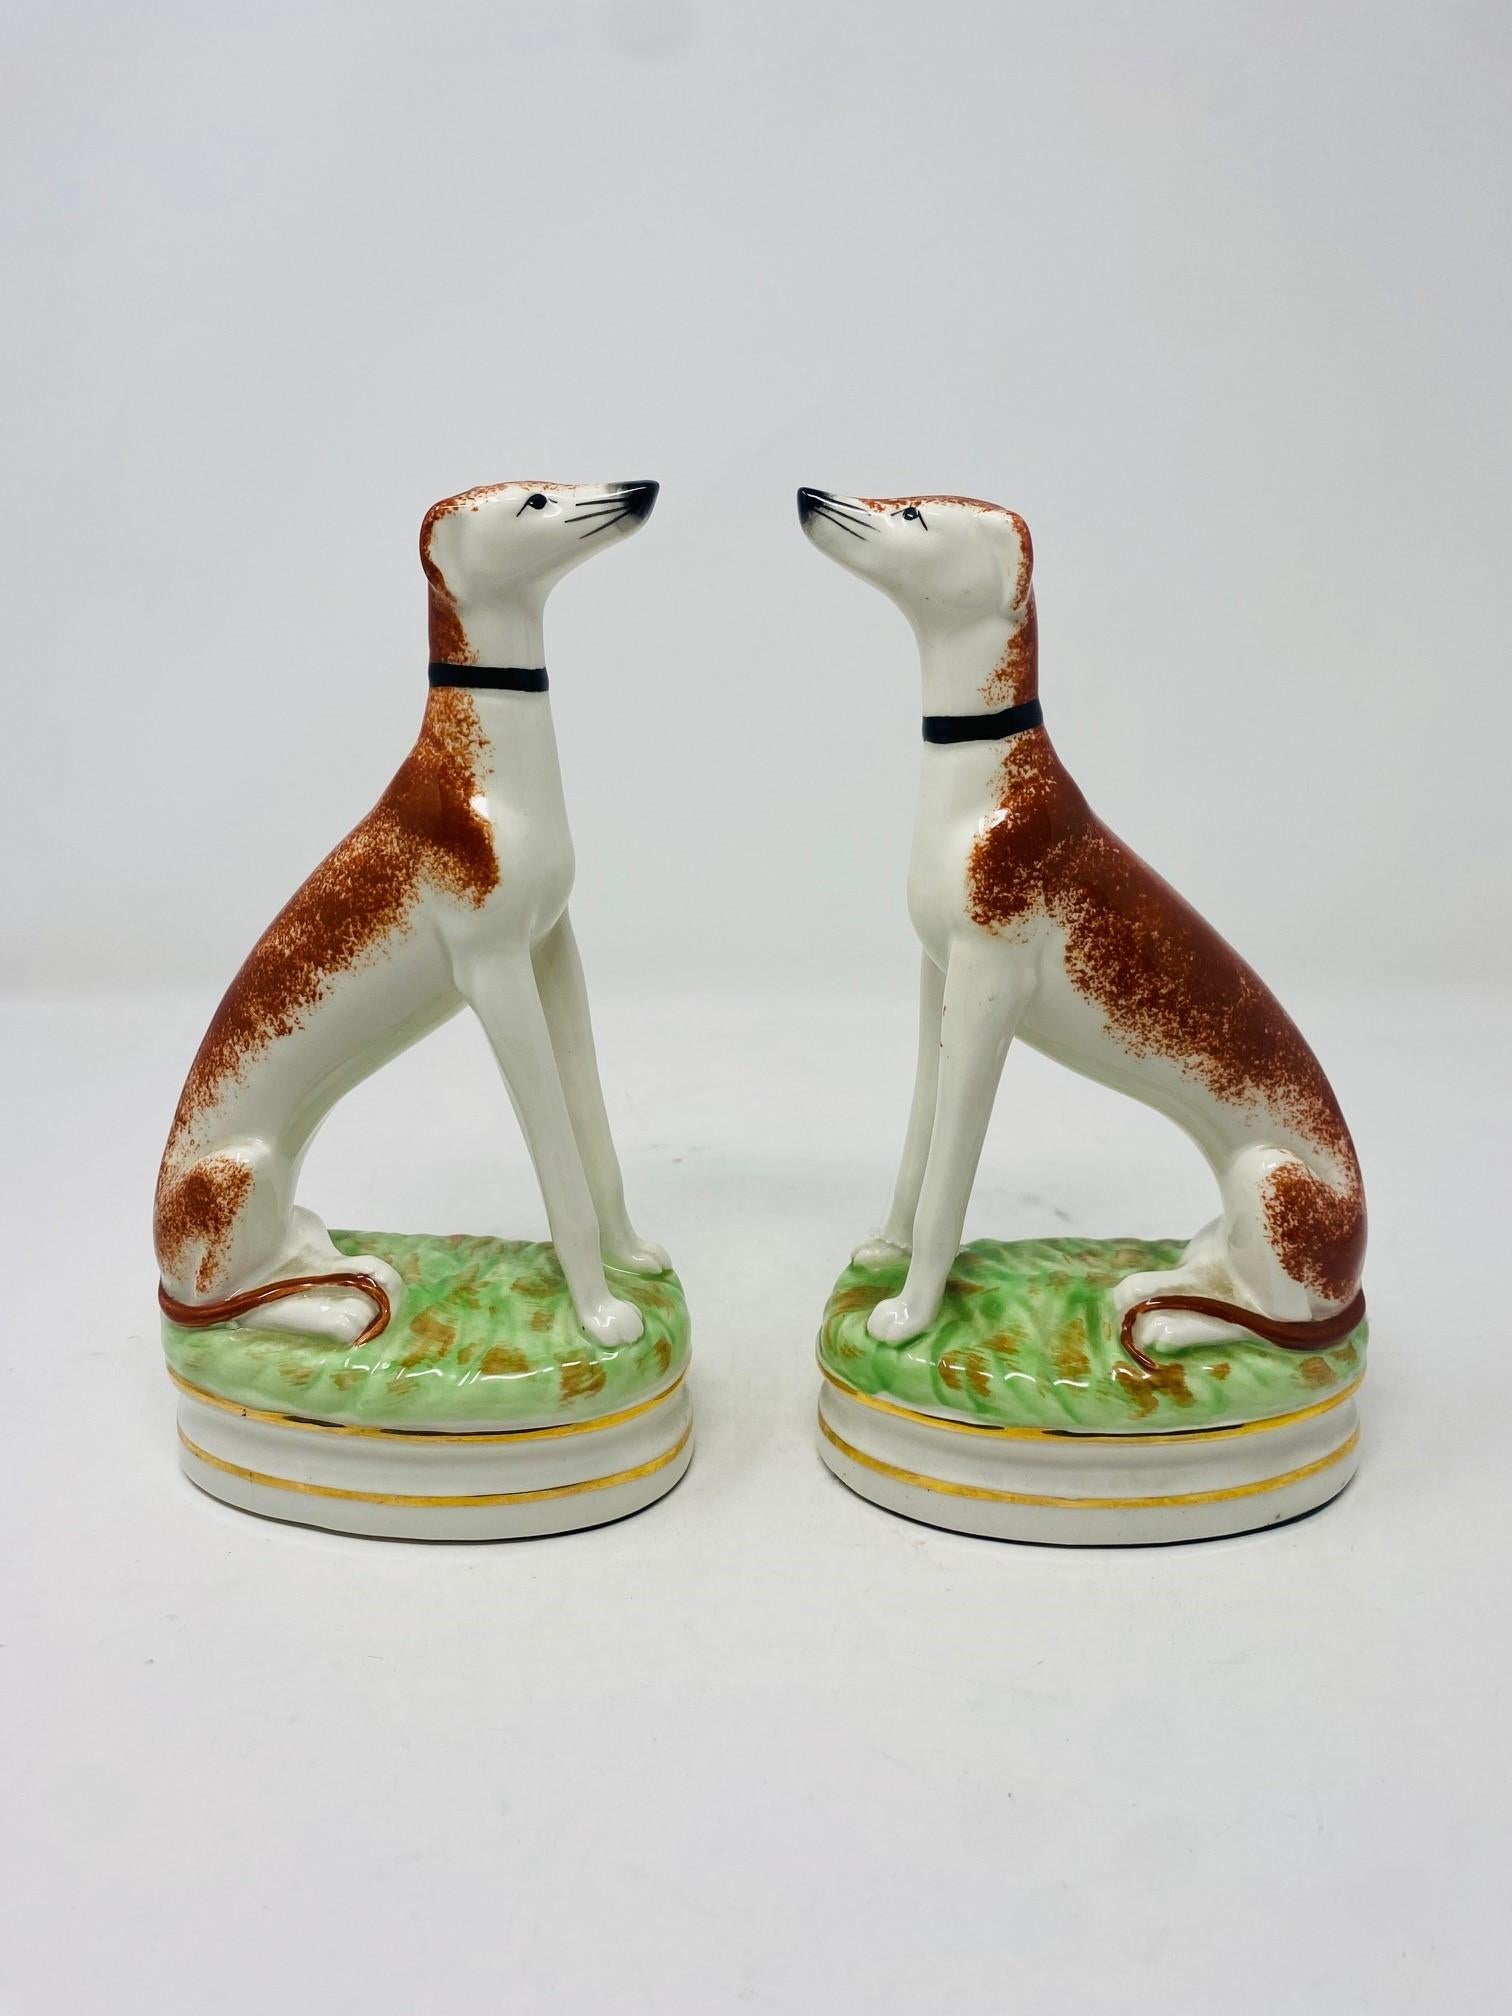 Fabulous pair of porcelain staffordshire hunting dog figures sitting on grass cushions with gold trim. Underneath the protective felt pad is a hole which the company purposely made so that pebbles or sand could be filled to add additional weight if